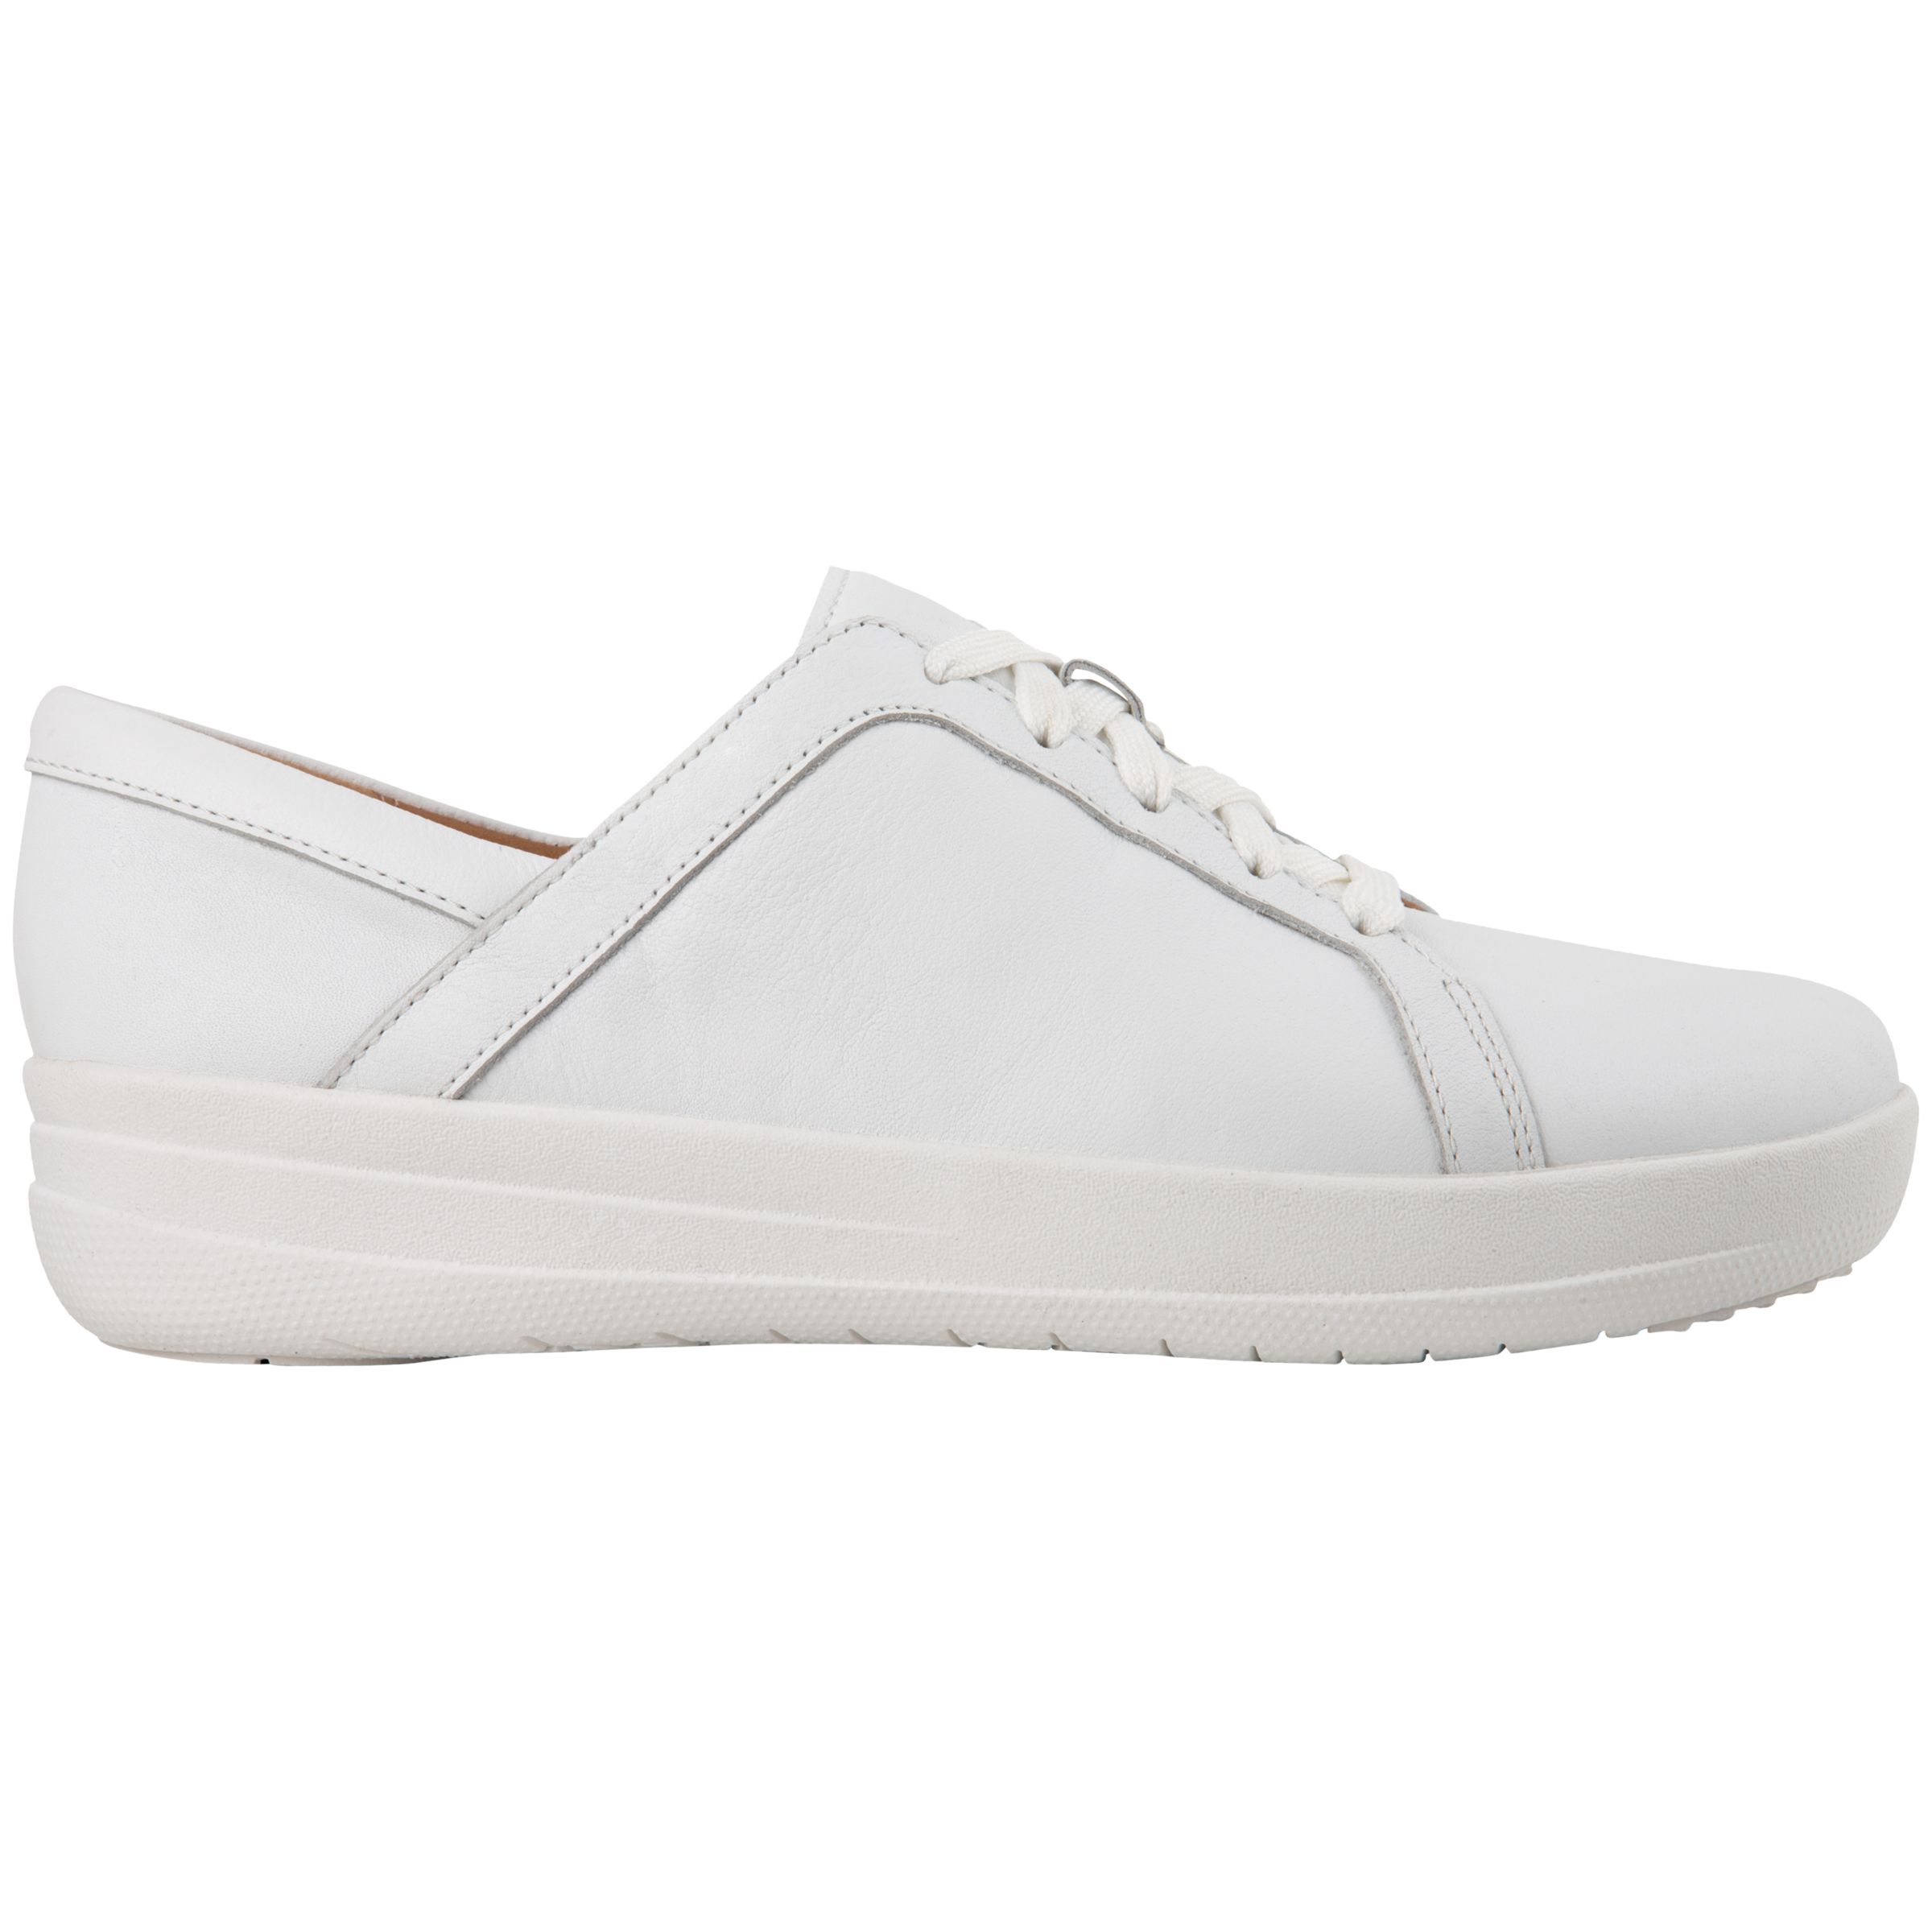 FitFlop F-Sporty II Lace Up Trainers, White Leather